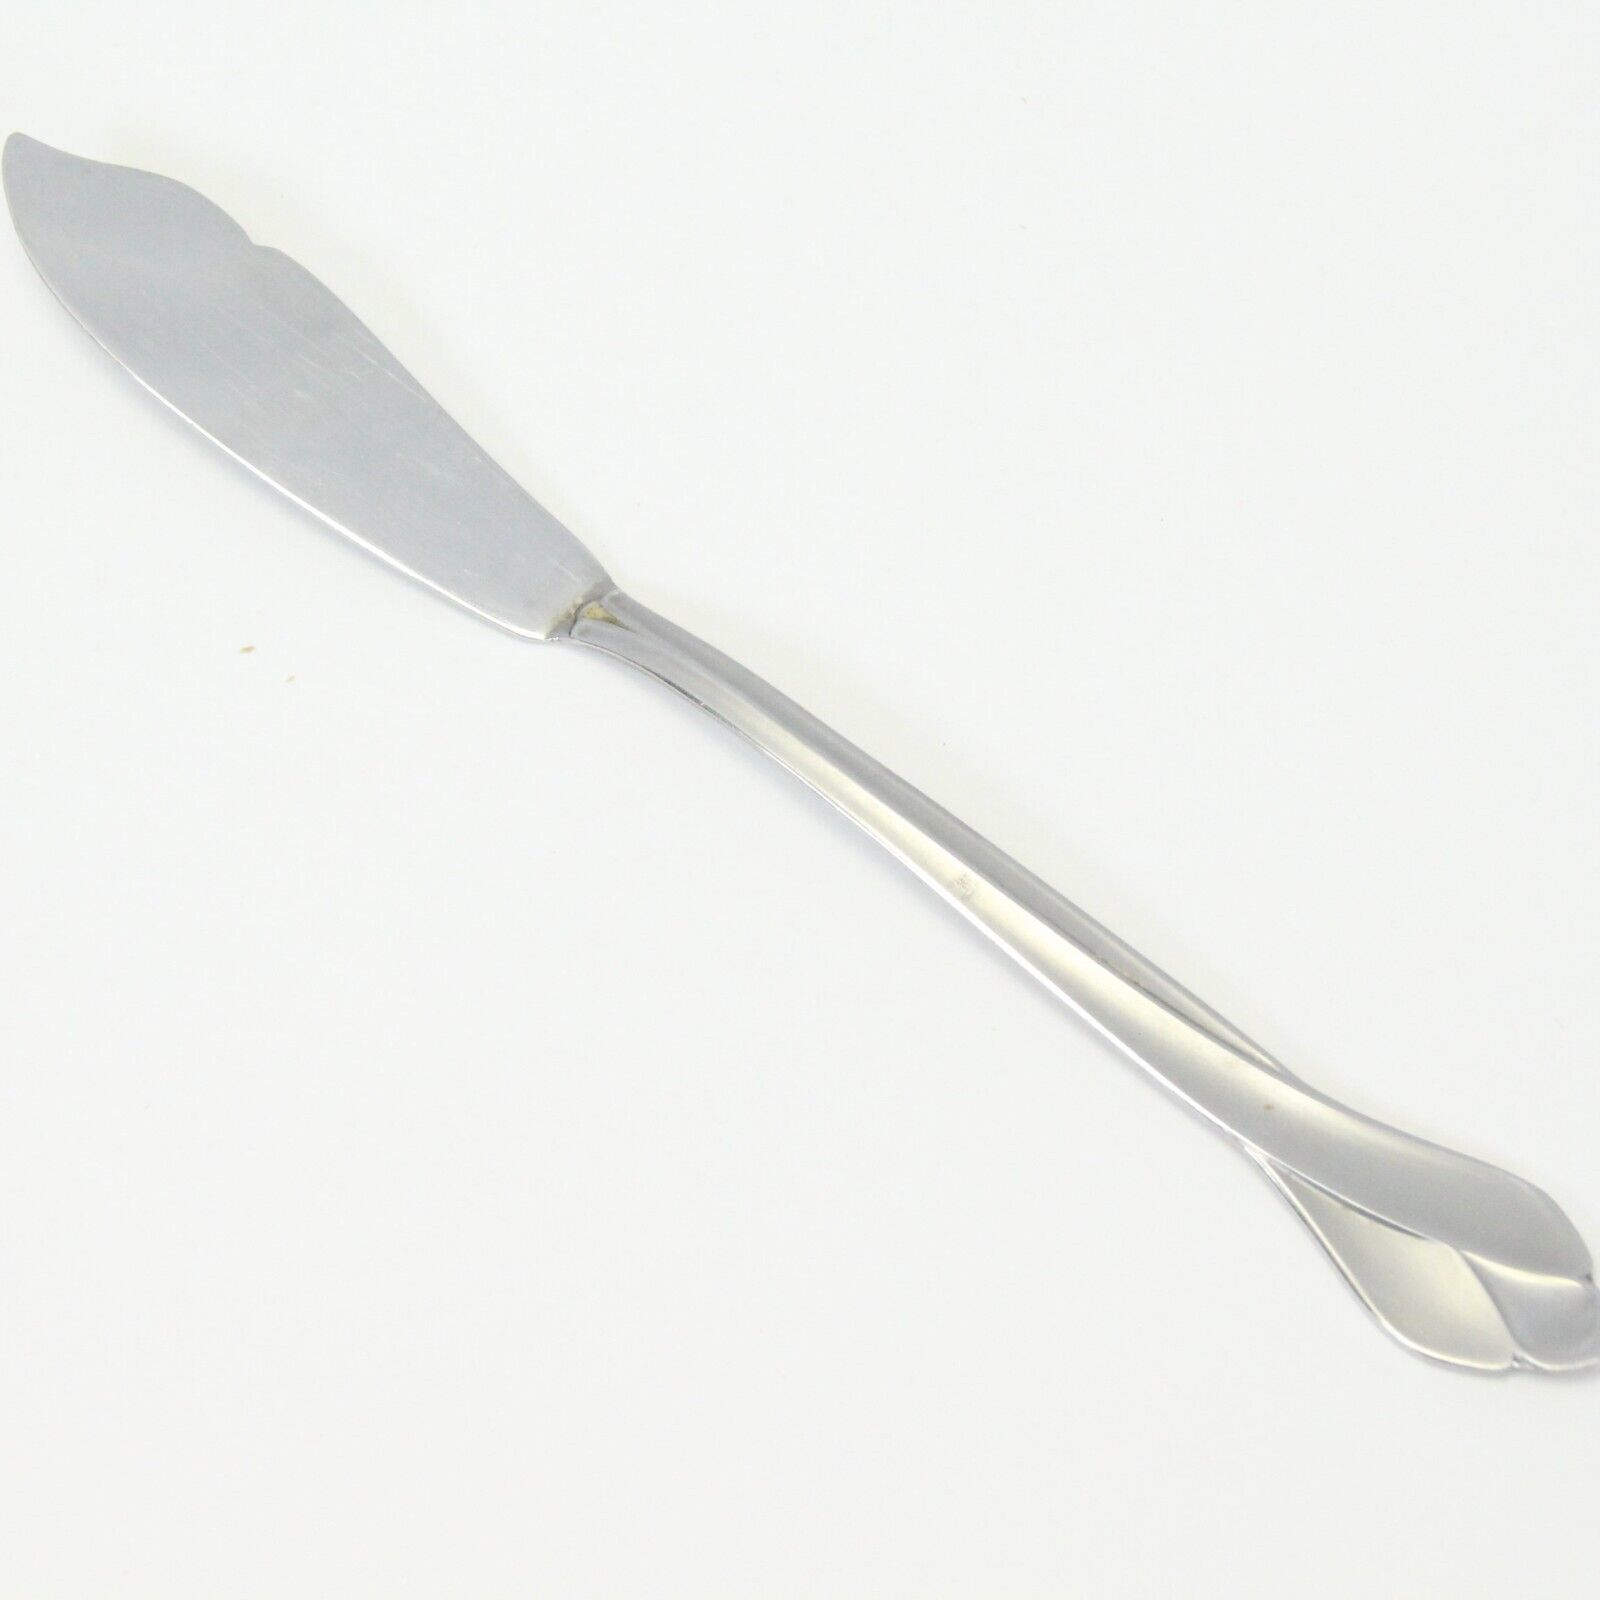 Primary image for Oneida Tribeca Butter Knife 6 5/8" Stainless